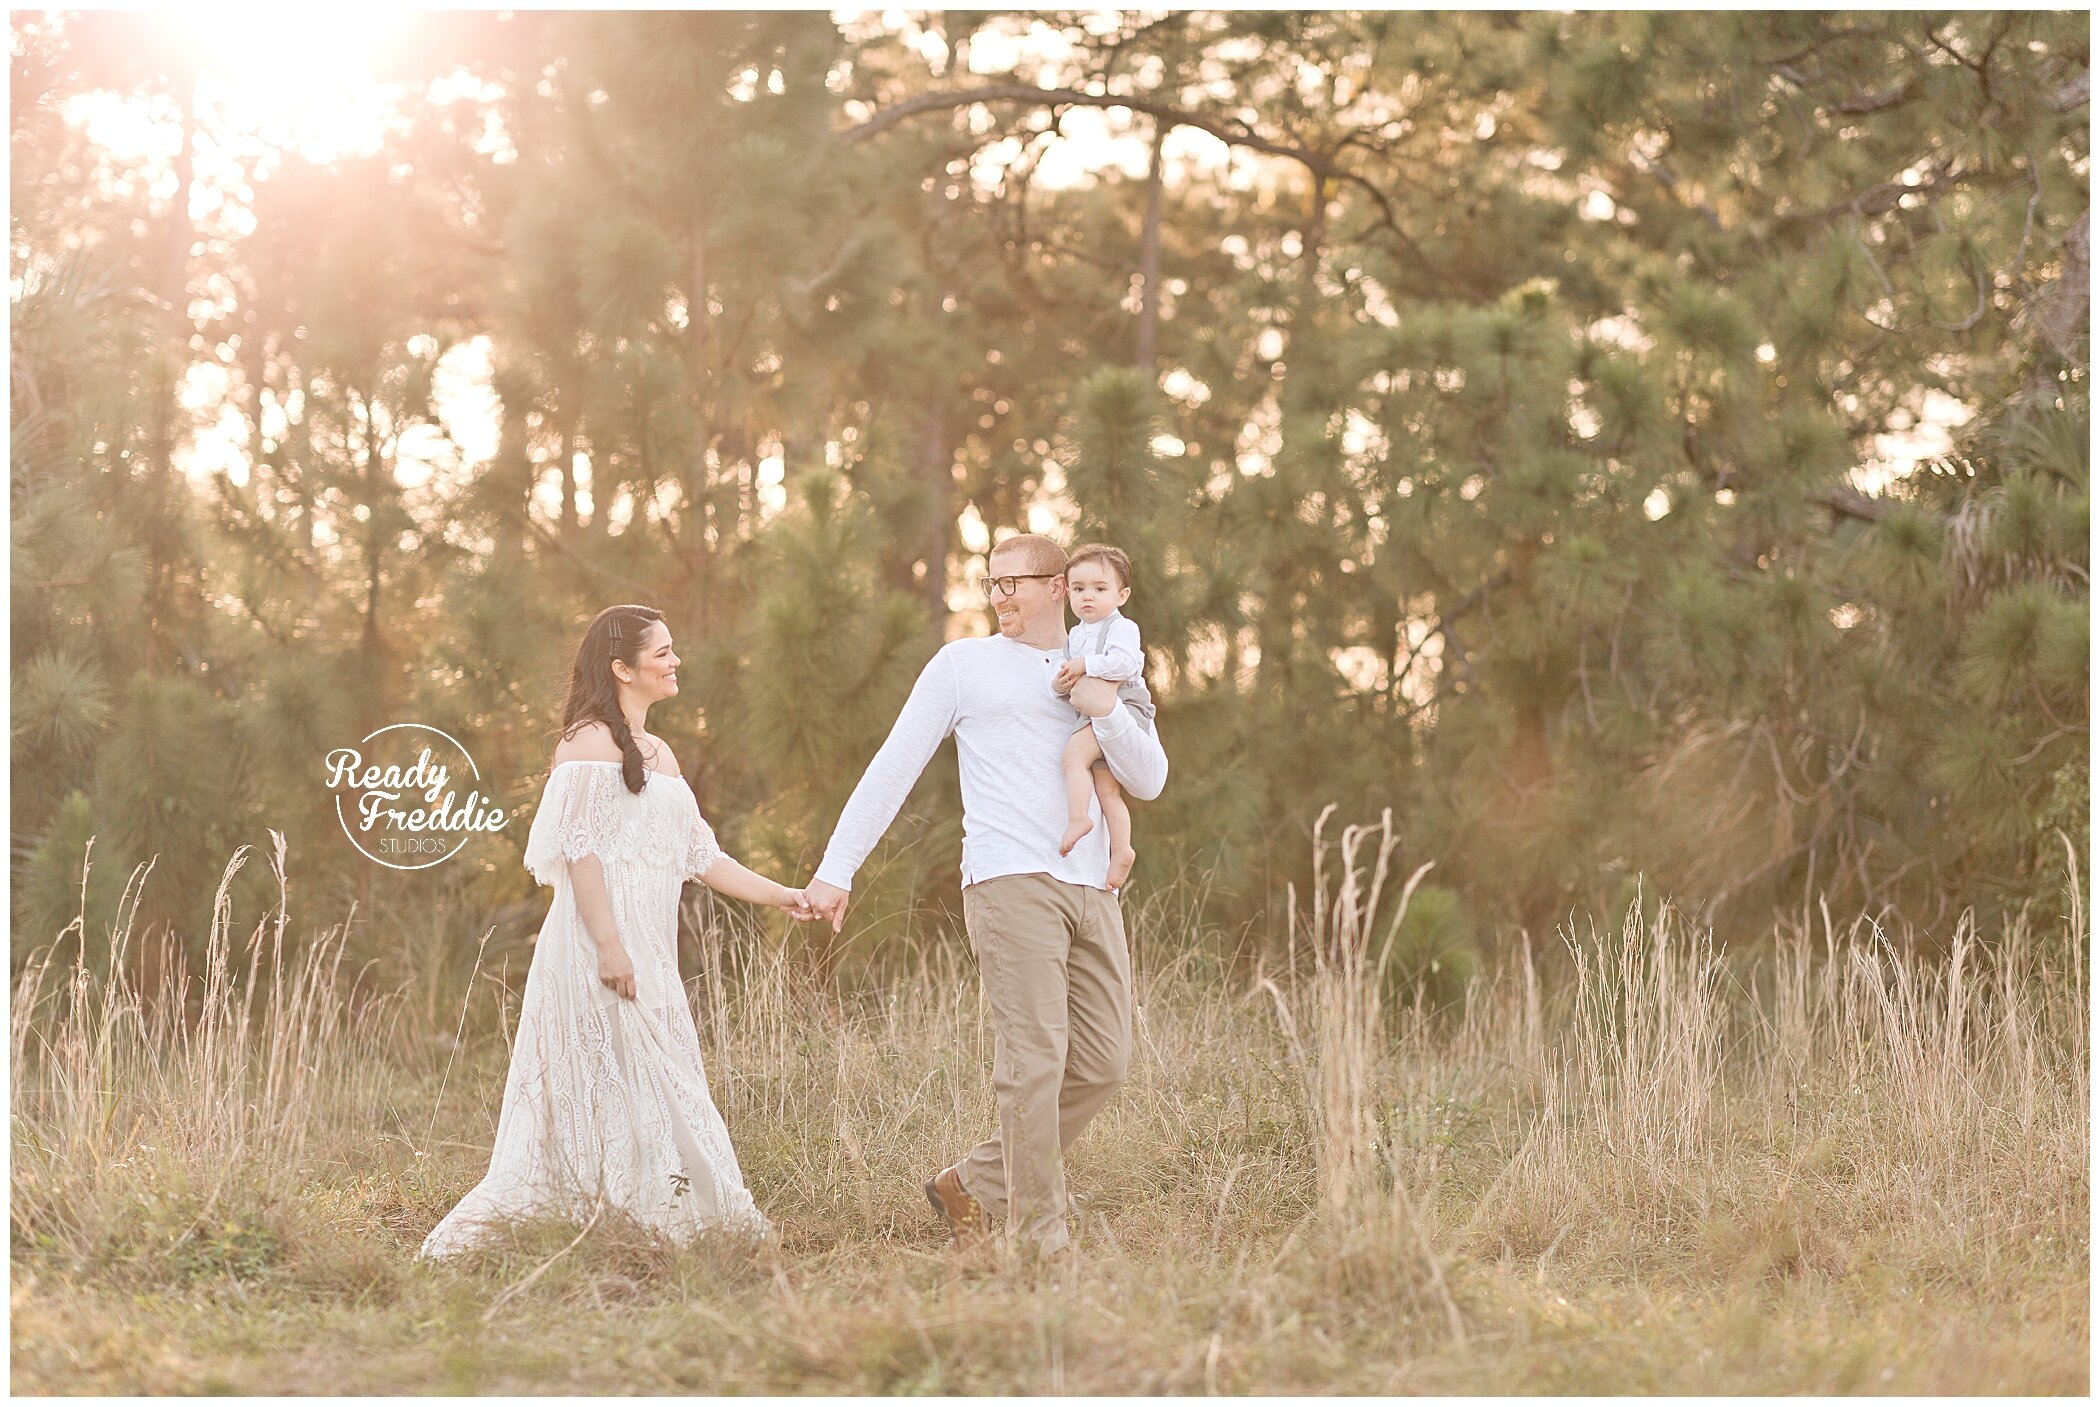 Ideas for poses family photography session during sunset | Ready Freddie Studios | Miami, FL